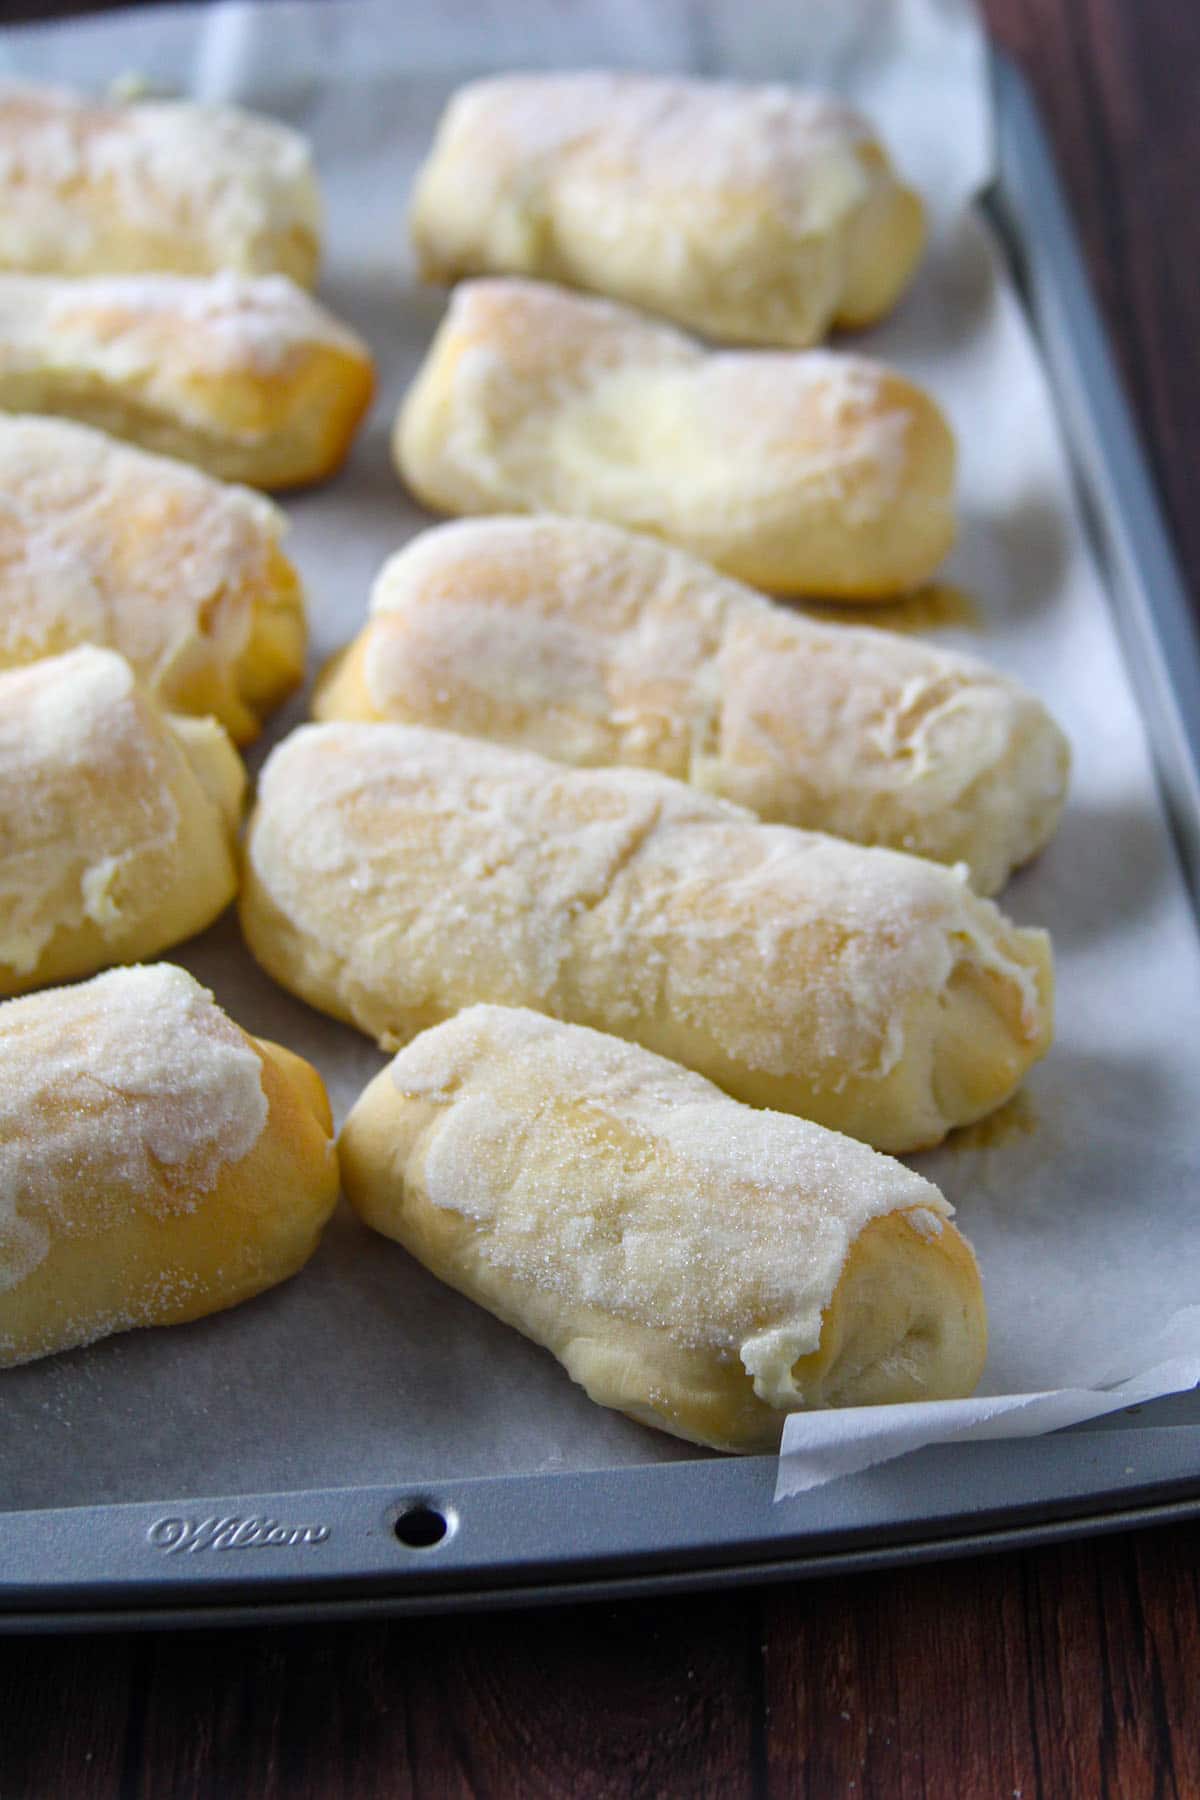 Warm cheese rolls on a tray.